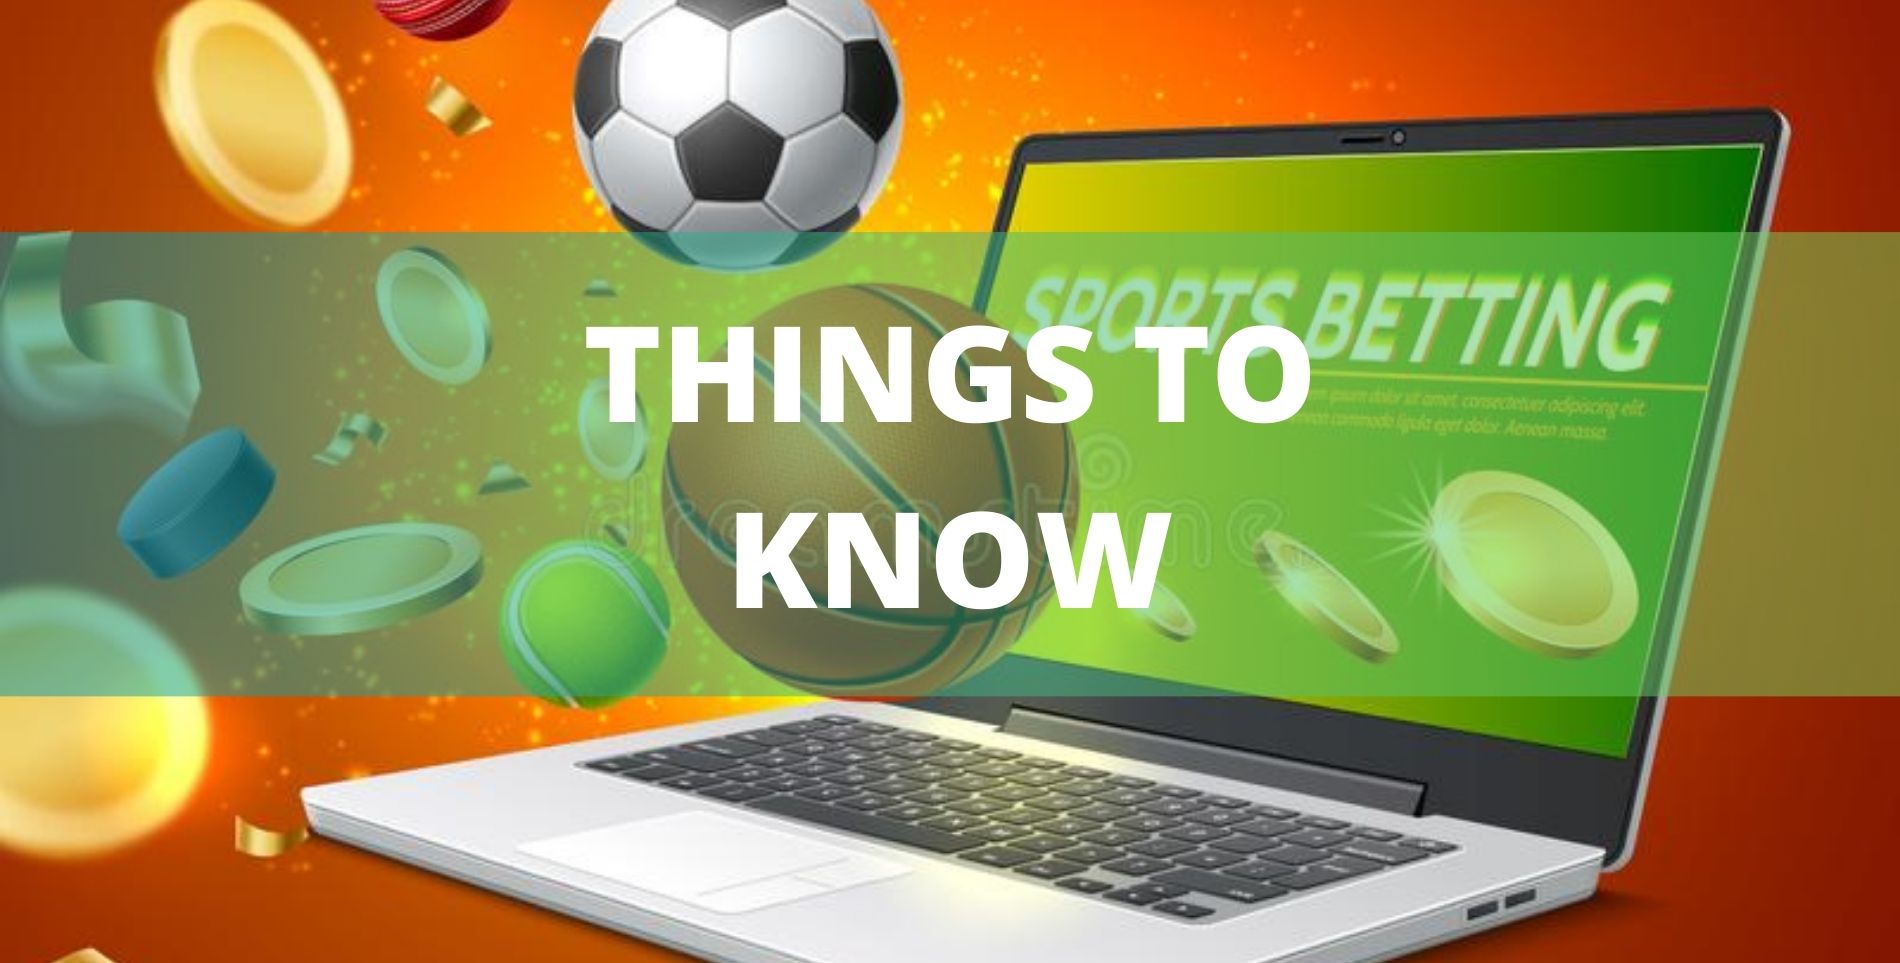 Things to know about Betting on sports